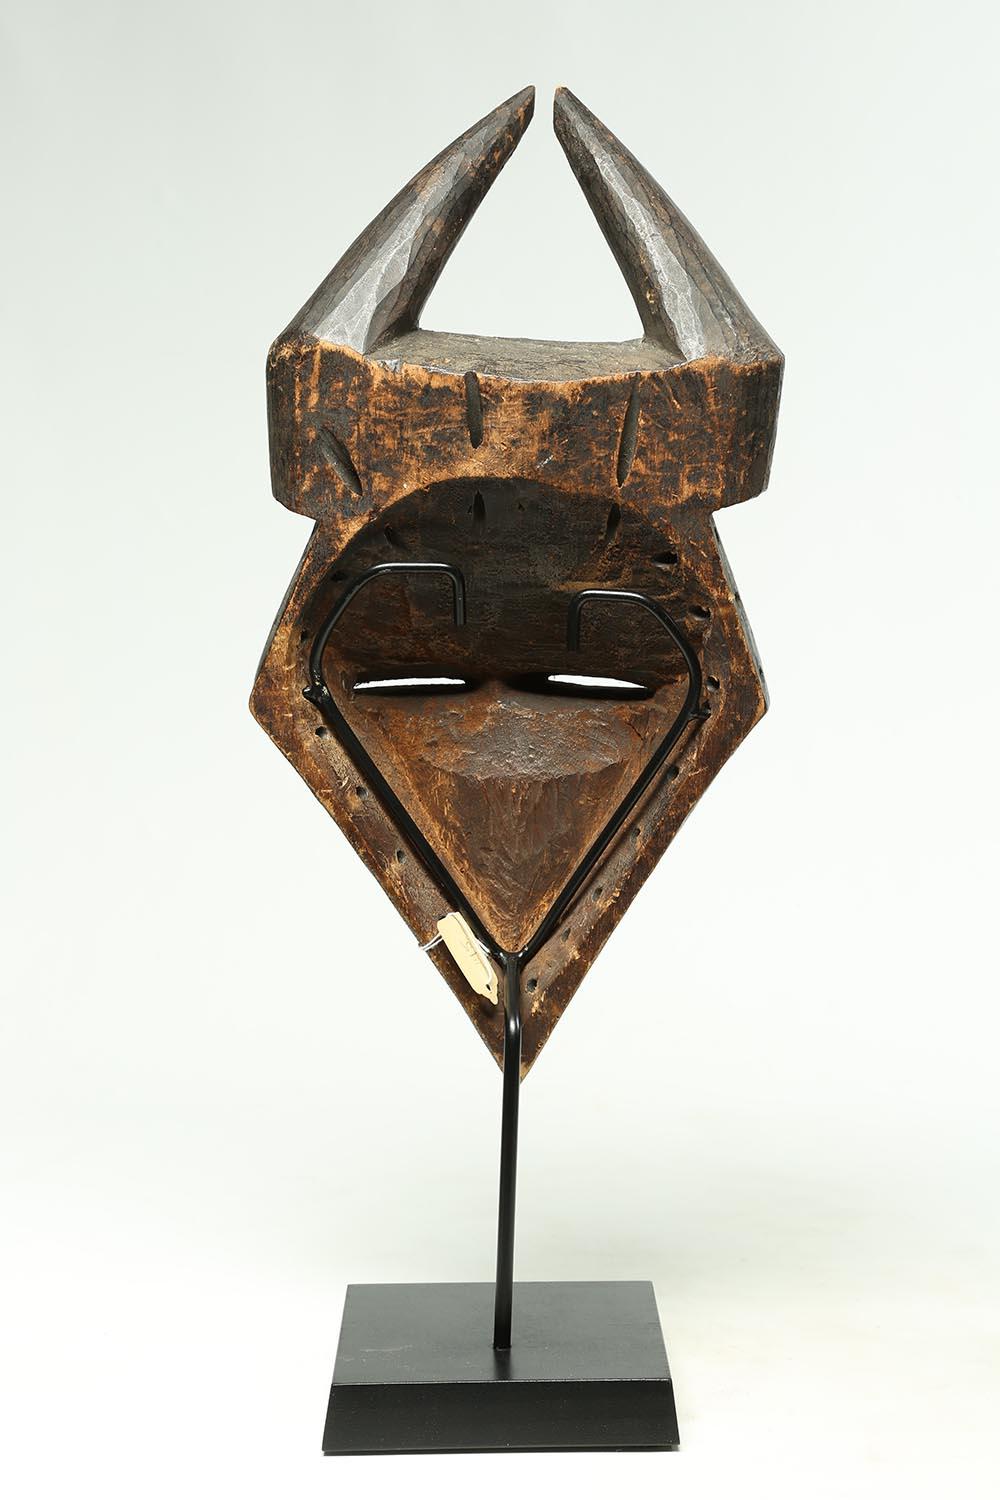 Hand-Carved Eastern Pende Geometric Tribal Mask with Horns Ex Museum Congo, Africa